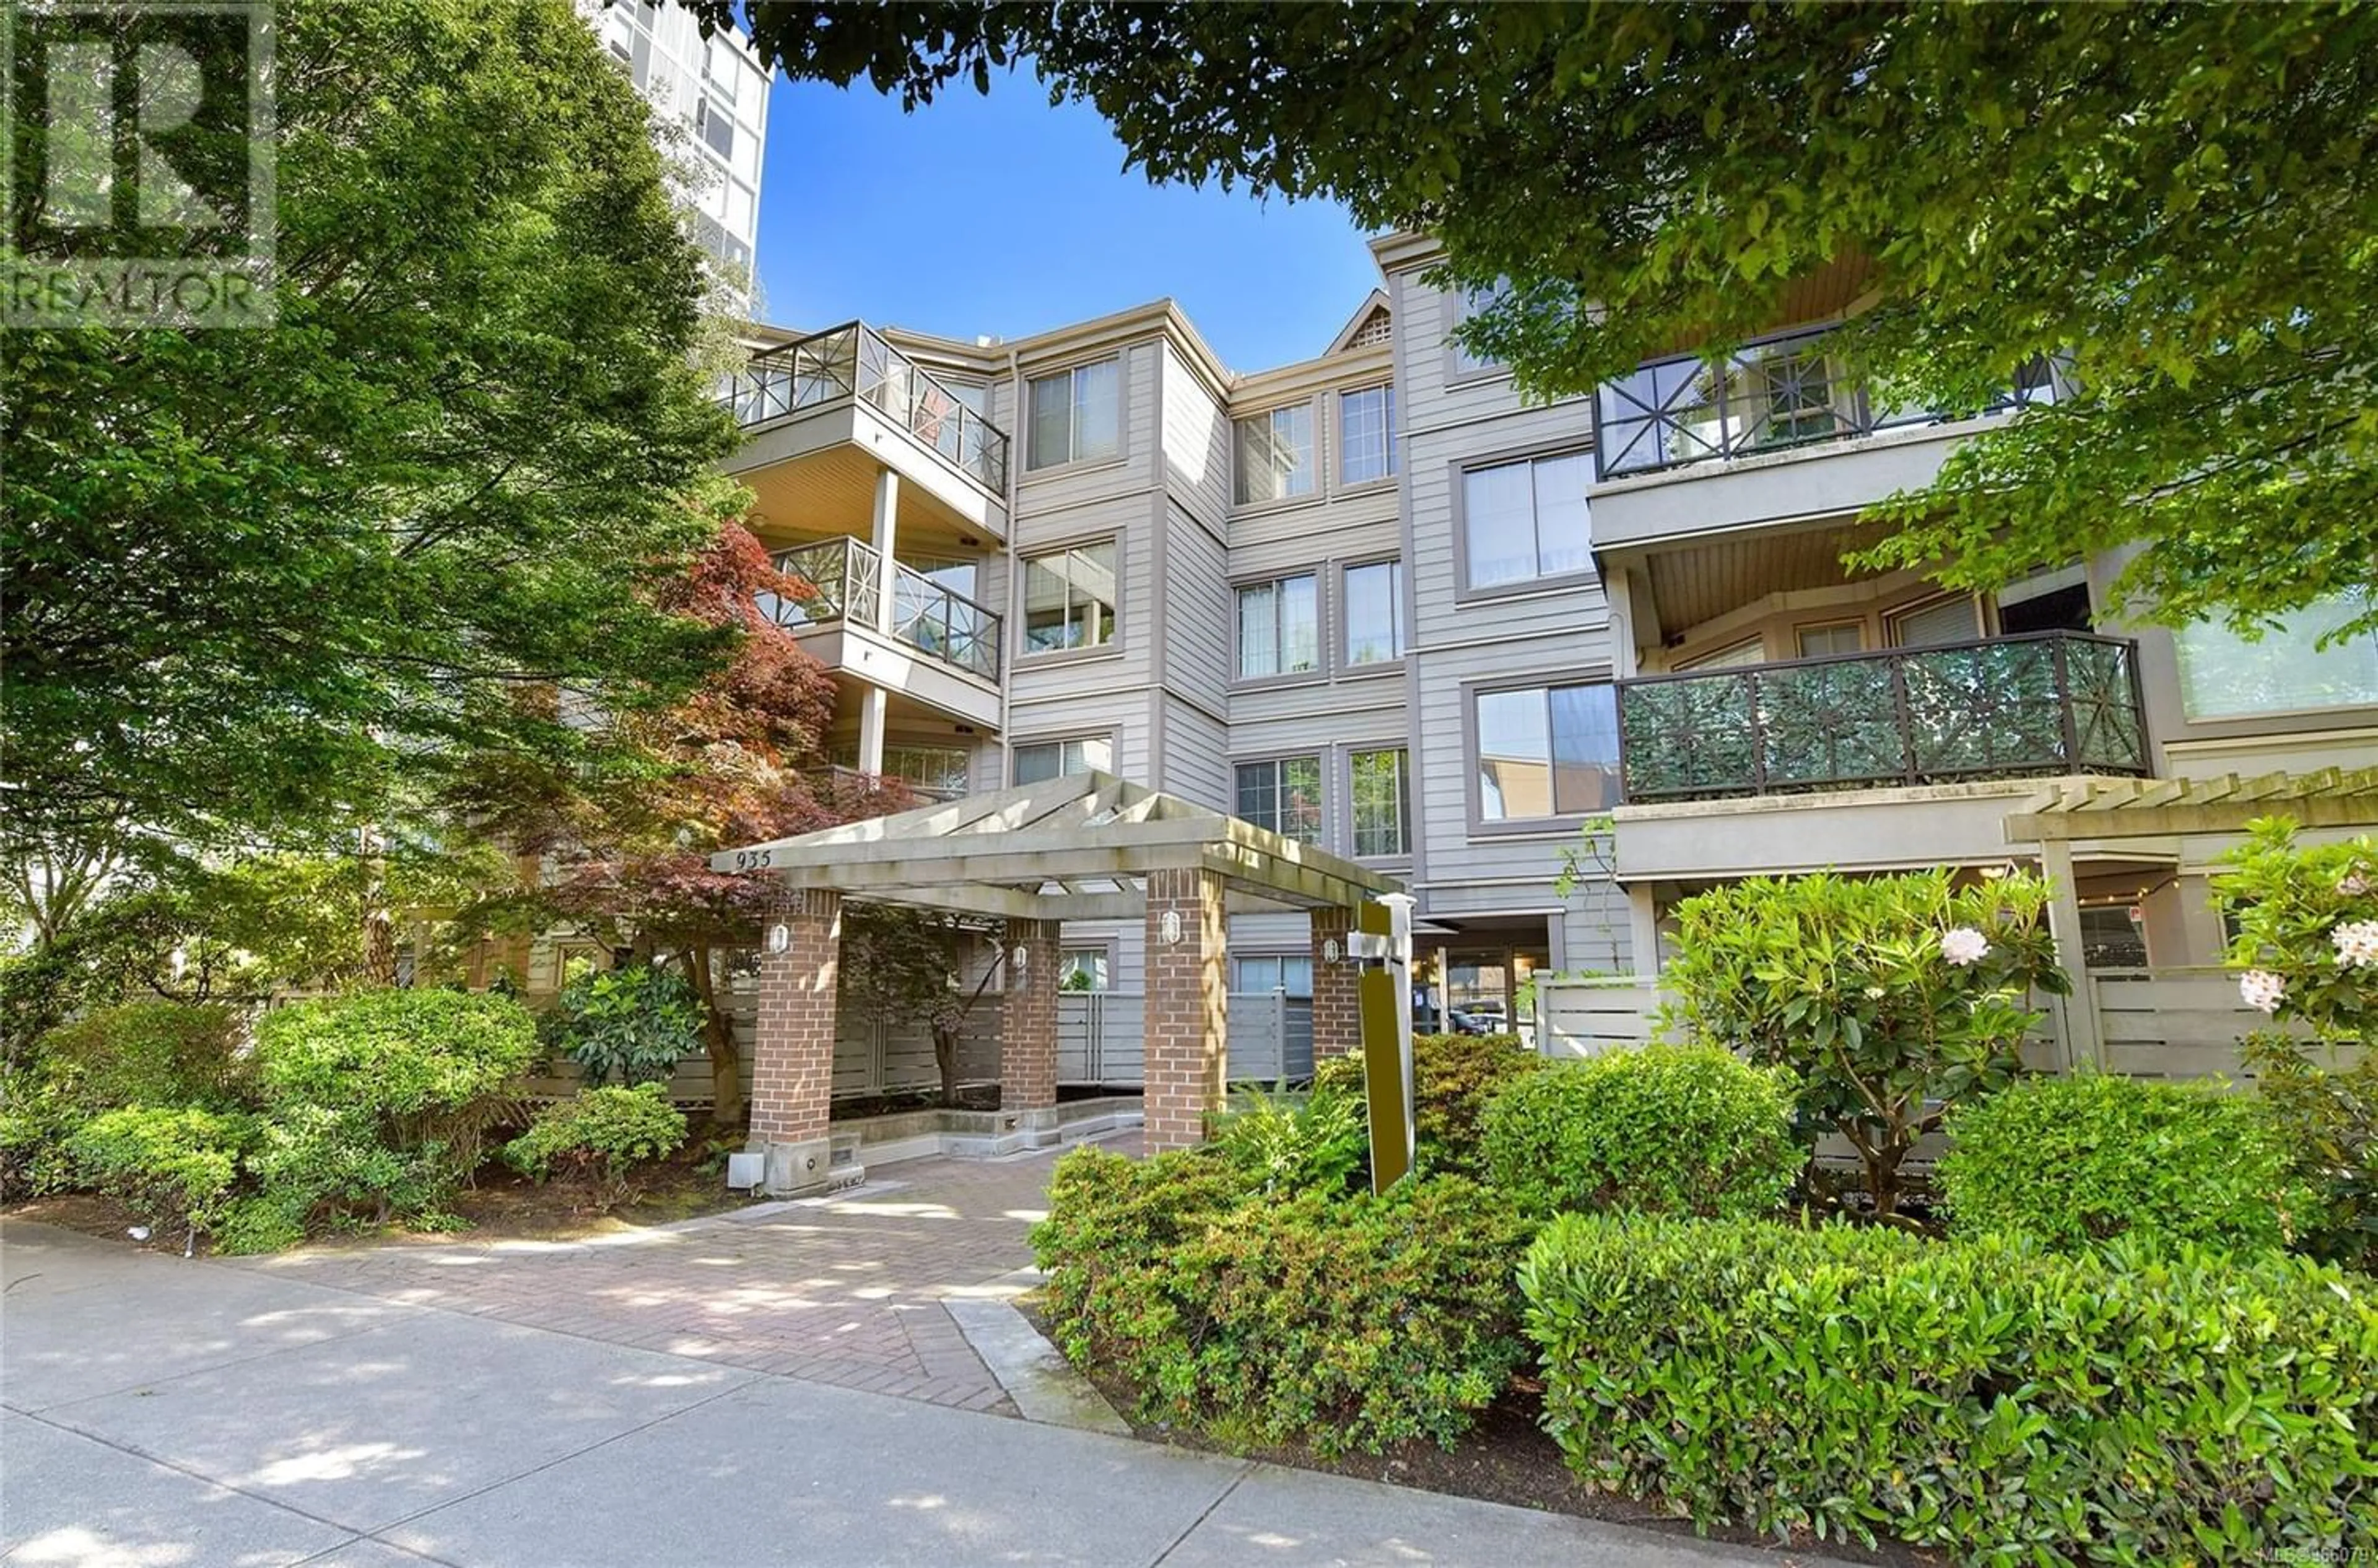 A pic from exterior of the house or condo for 401 935 Johnson St, Victoria British Columbia V8V3N5